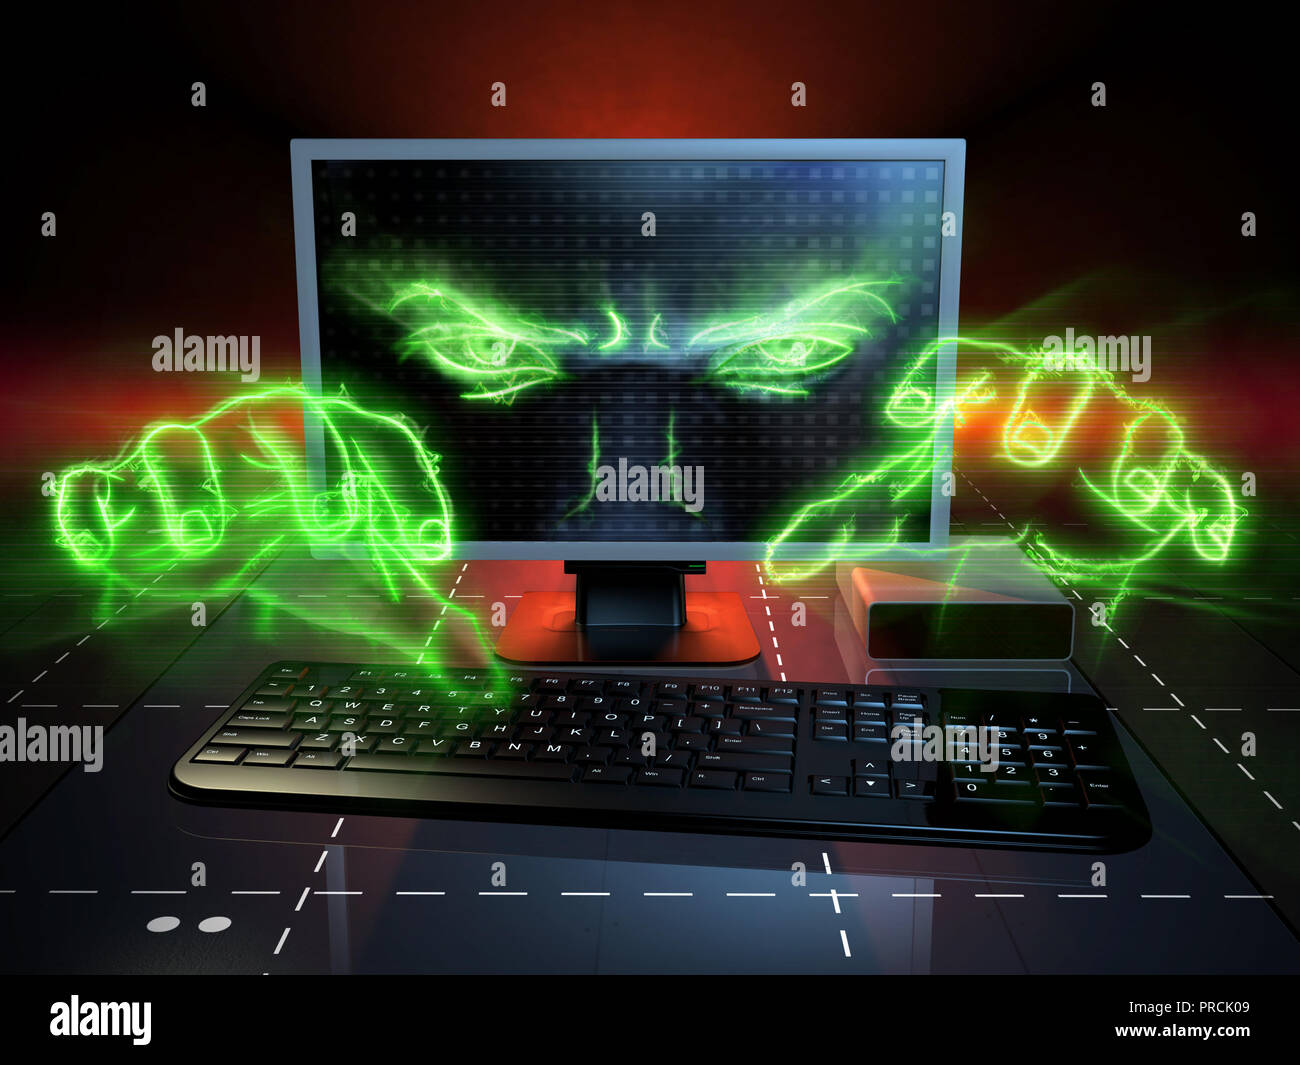 Menacing eyes and hands coming out from a computer monitor. Digital illustration. Stock Photo